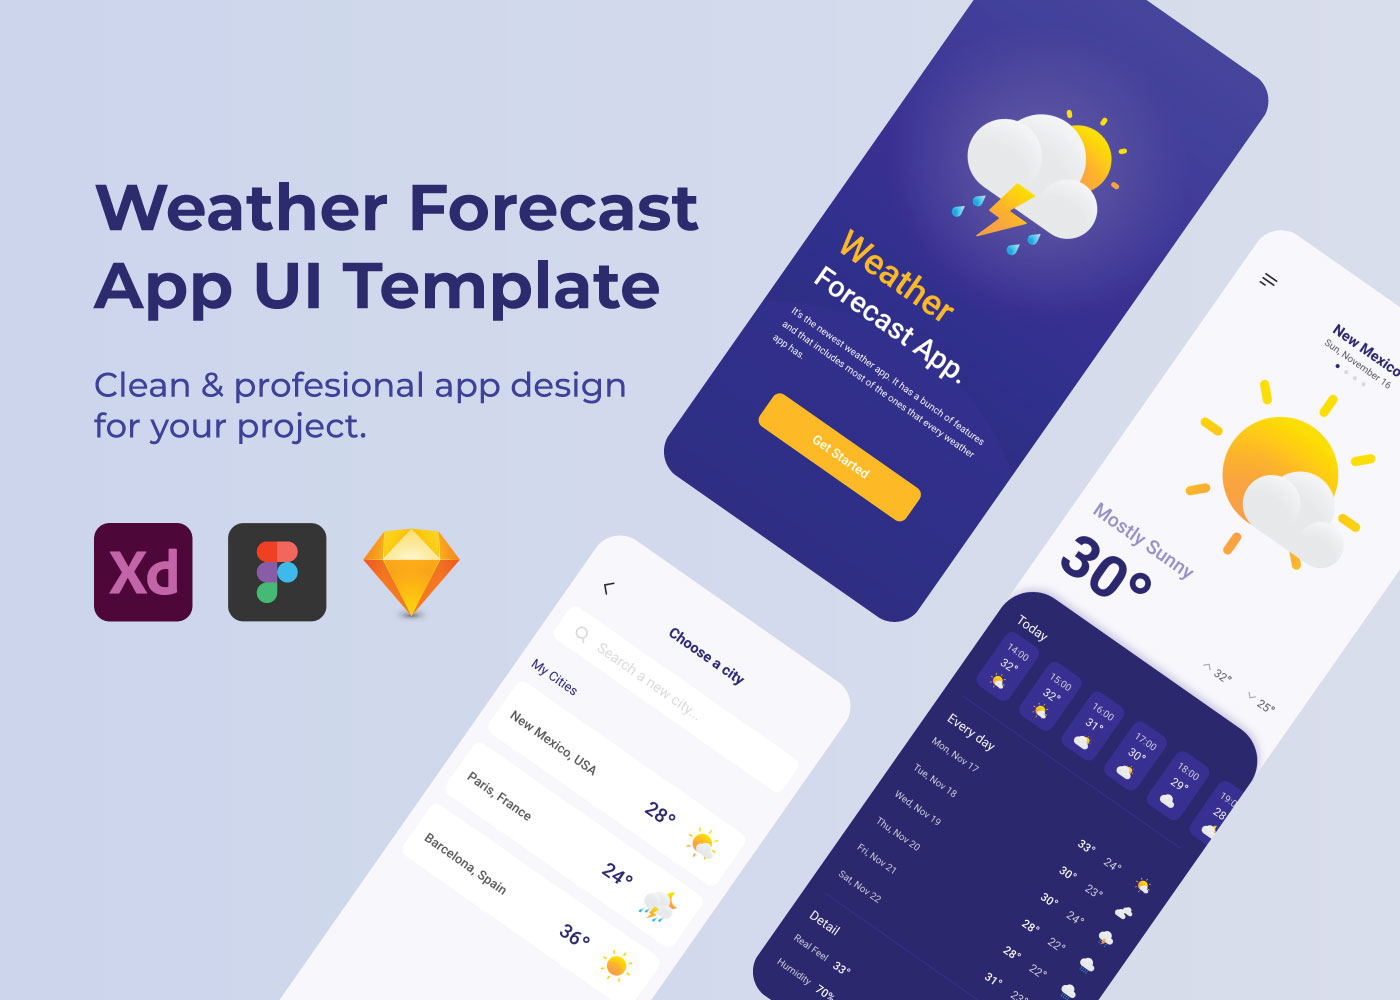 Weather Forecast App UI Kits Template free download